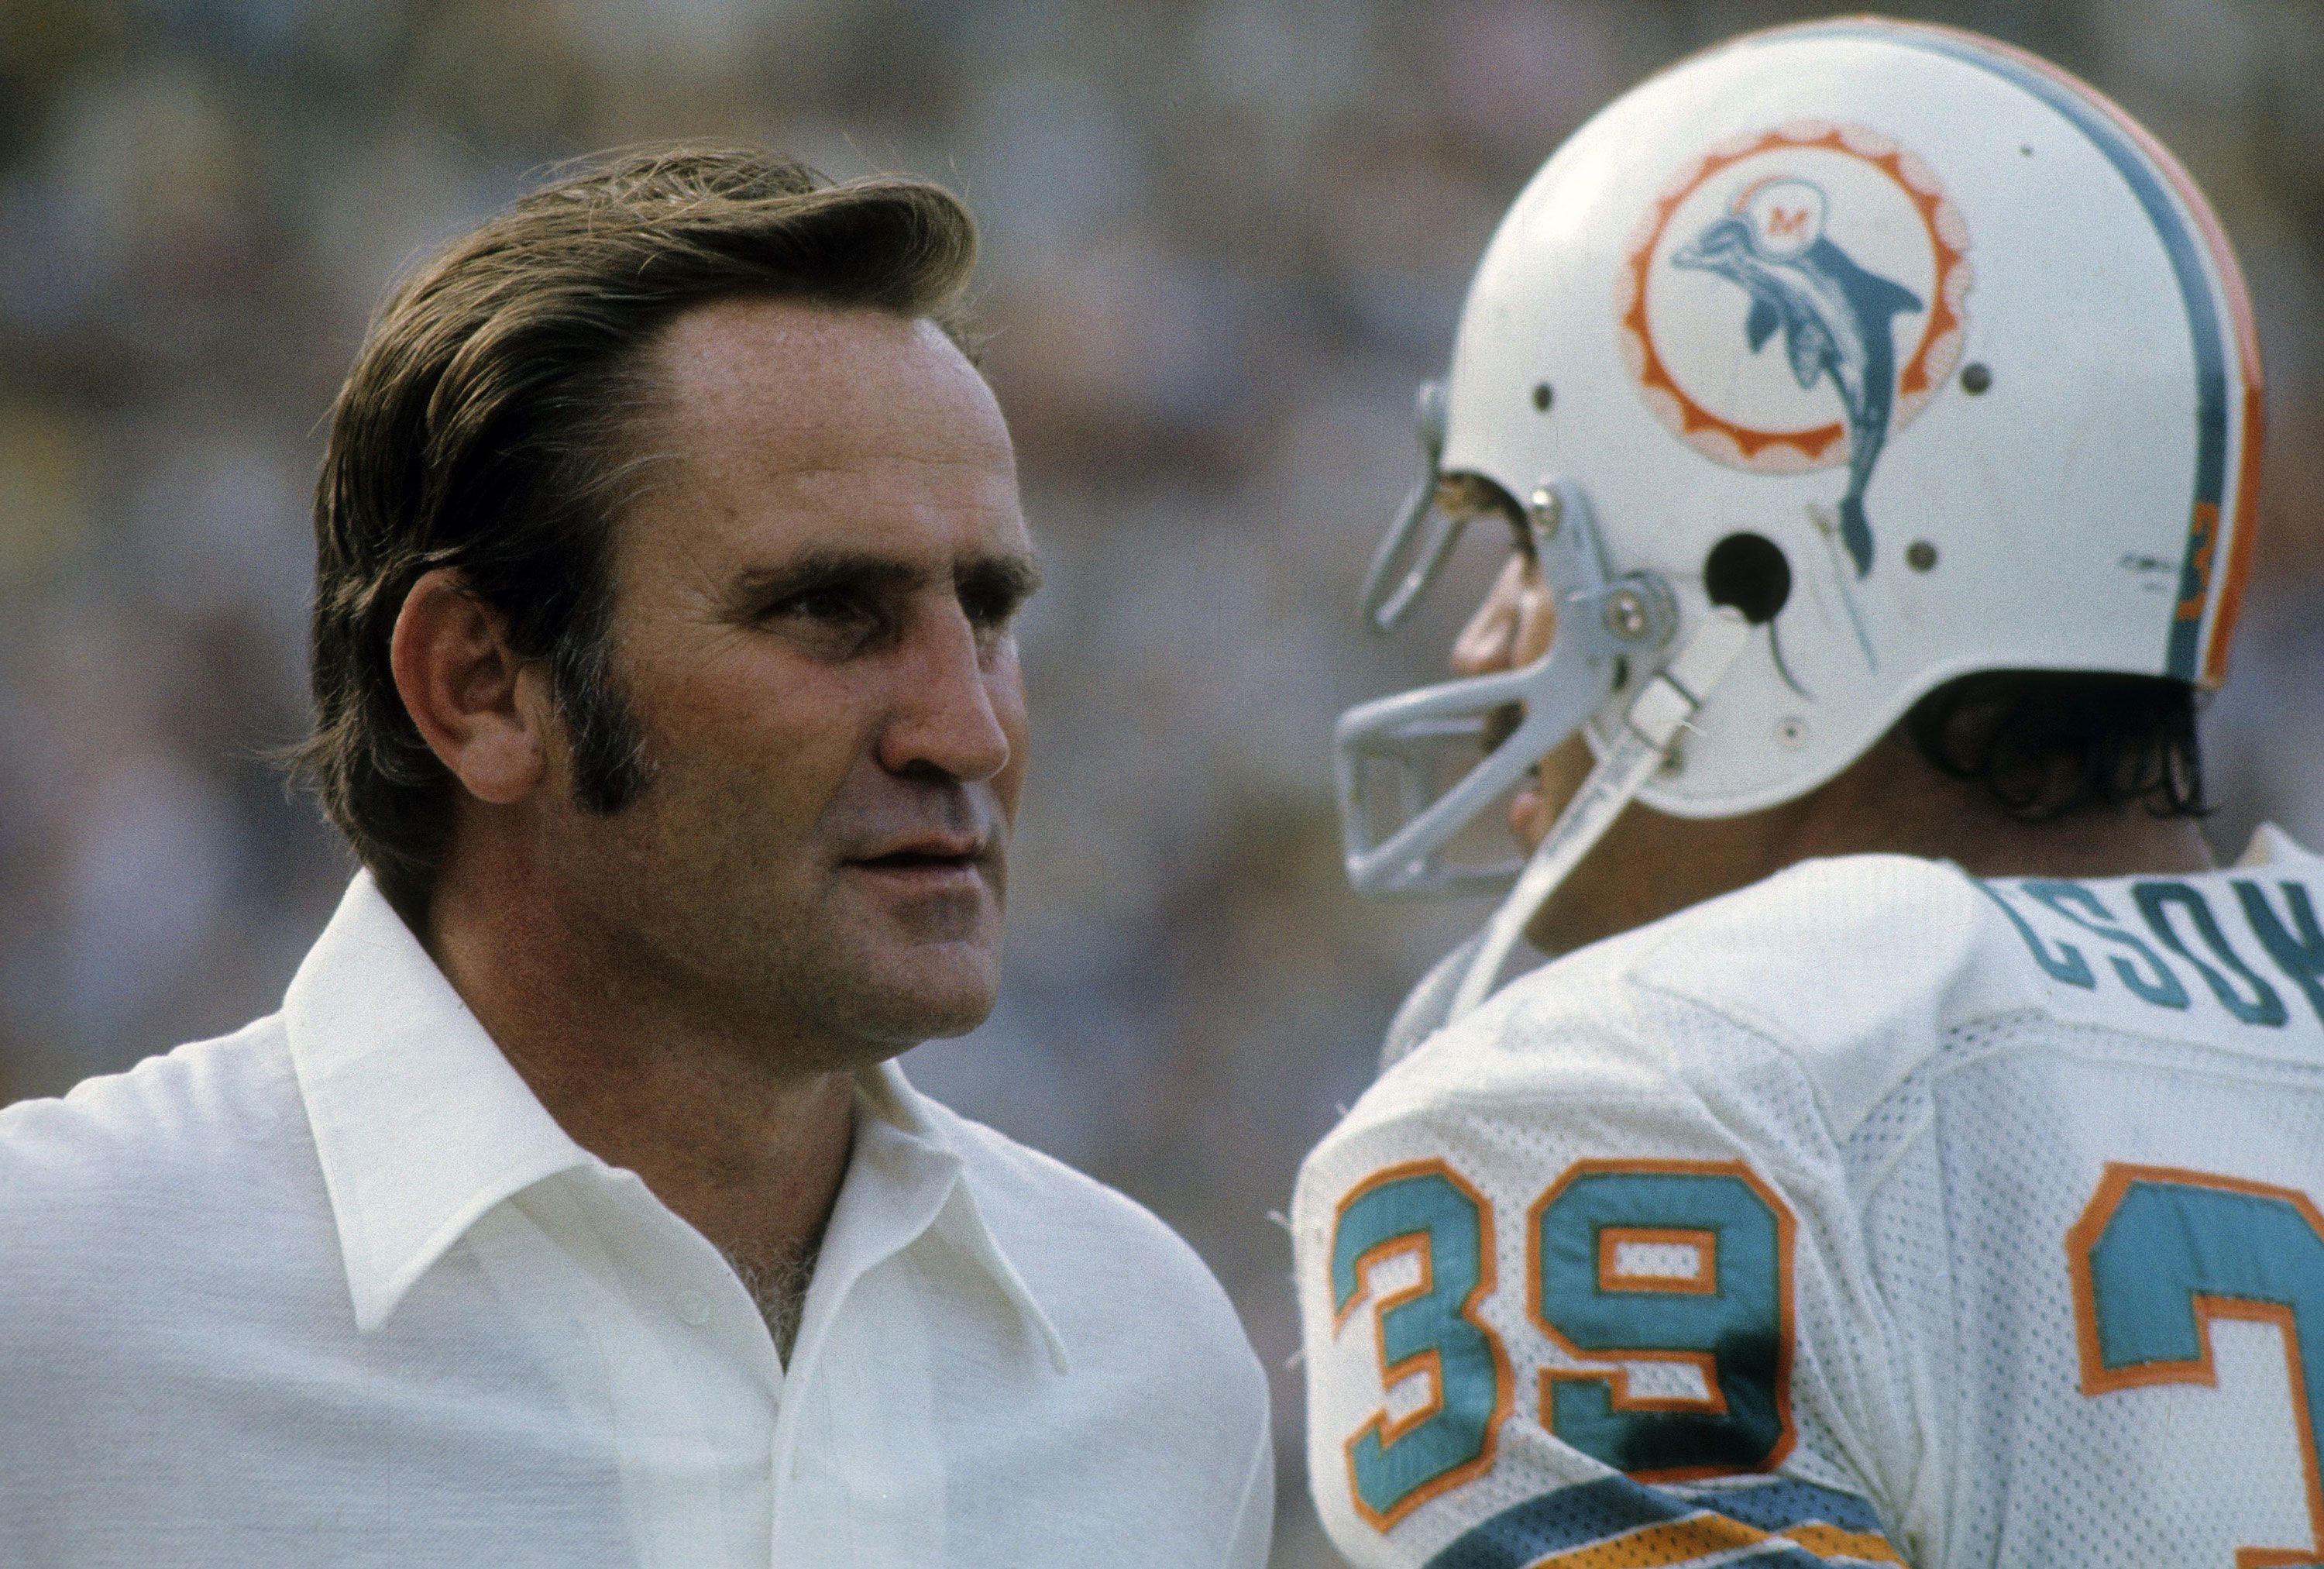 1972 Miami Dolphins: The inside story of the only perfect season